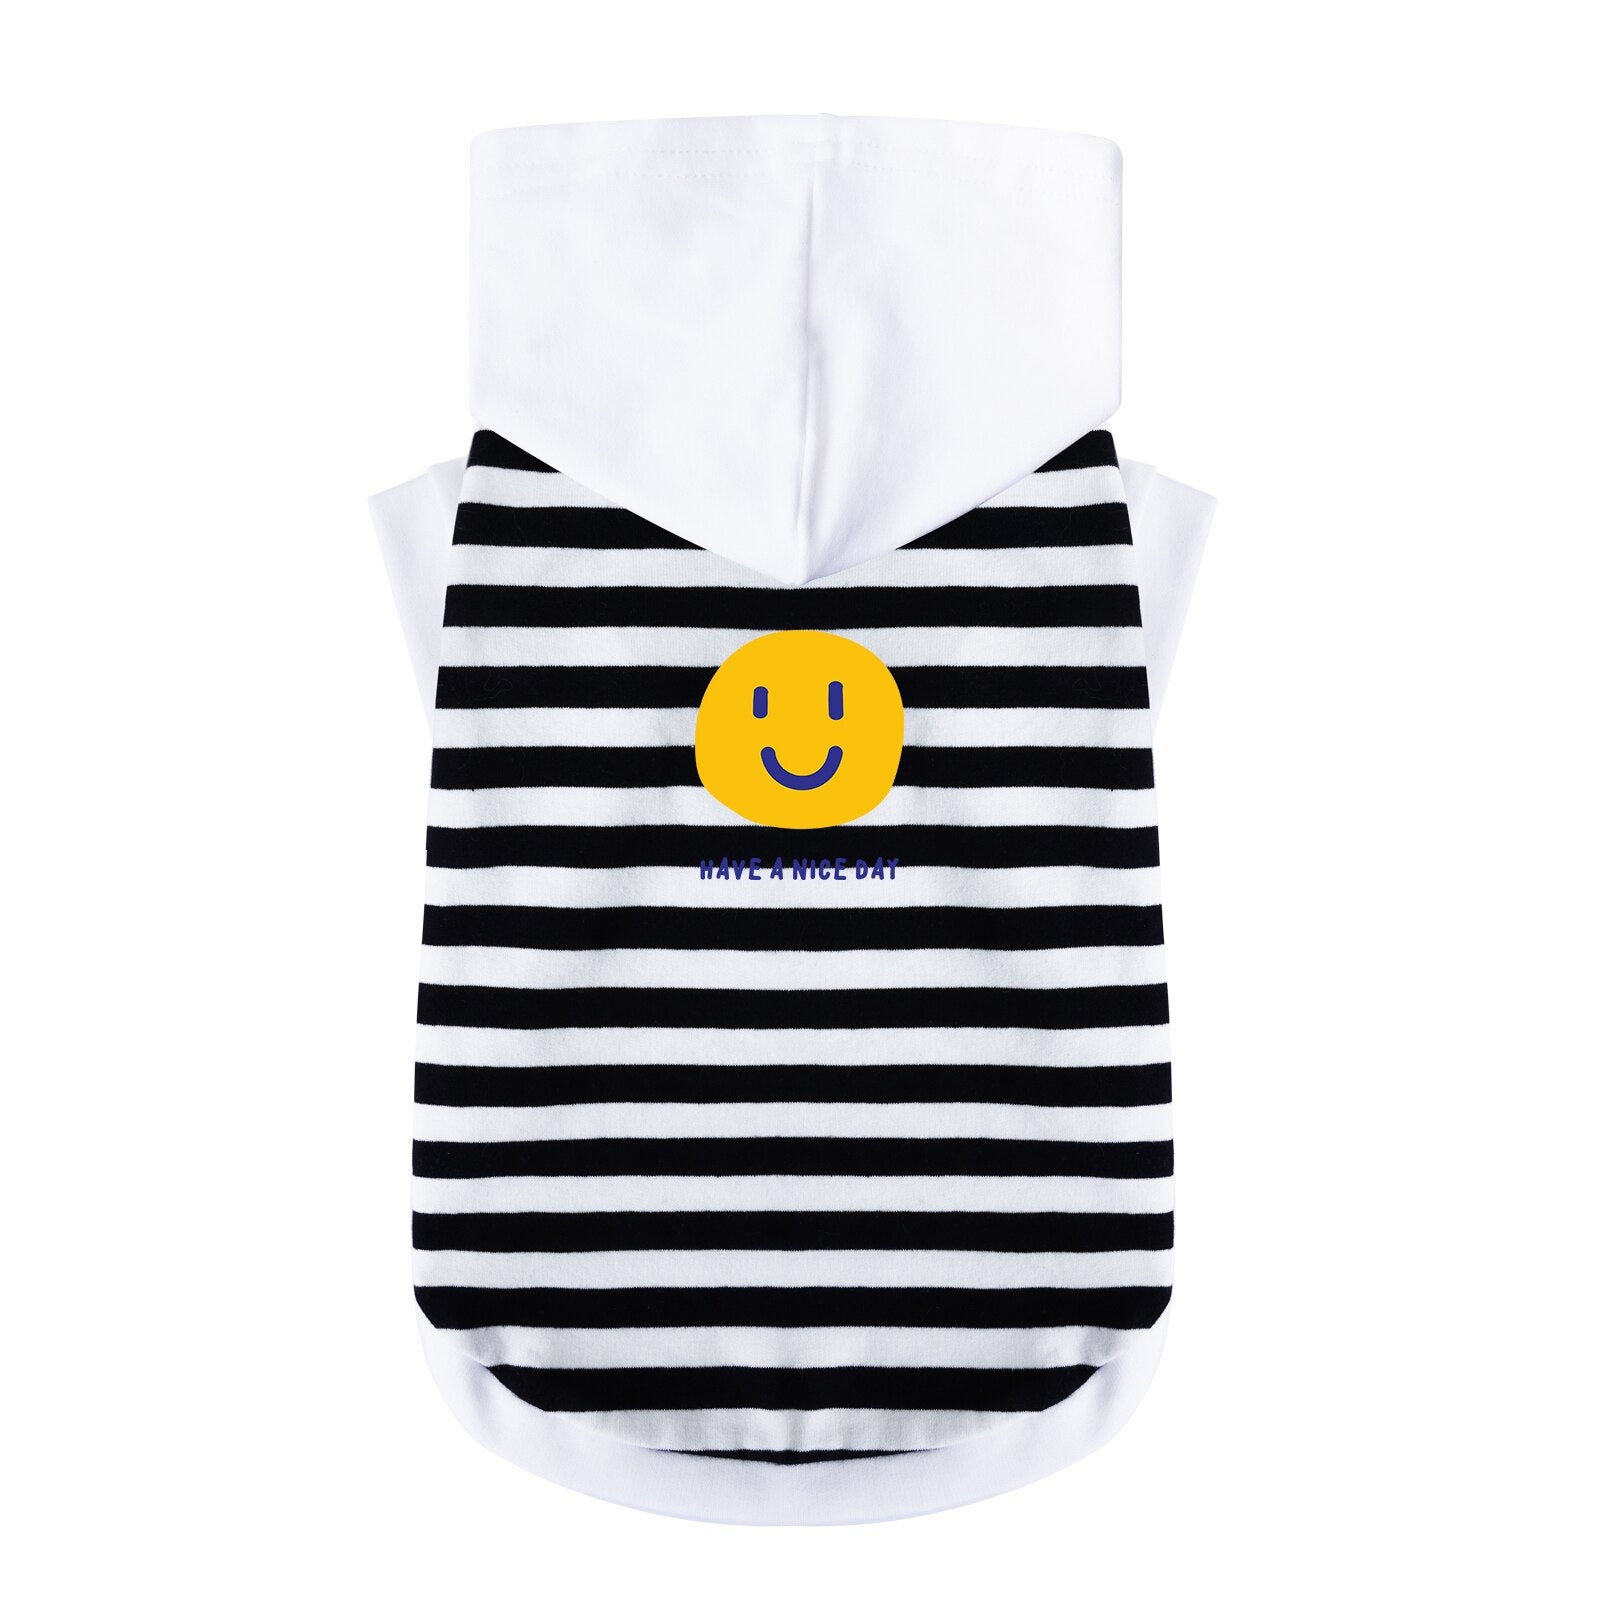 Smile Face Printed Pet Hoodies Stripe White Red, Cute Funny Sweet Cool Dogs Cats Clothes, Apparel for Chihuahua Yorkshire etc.